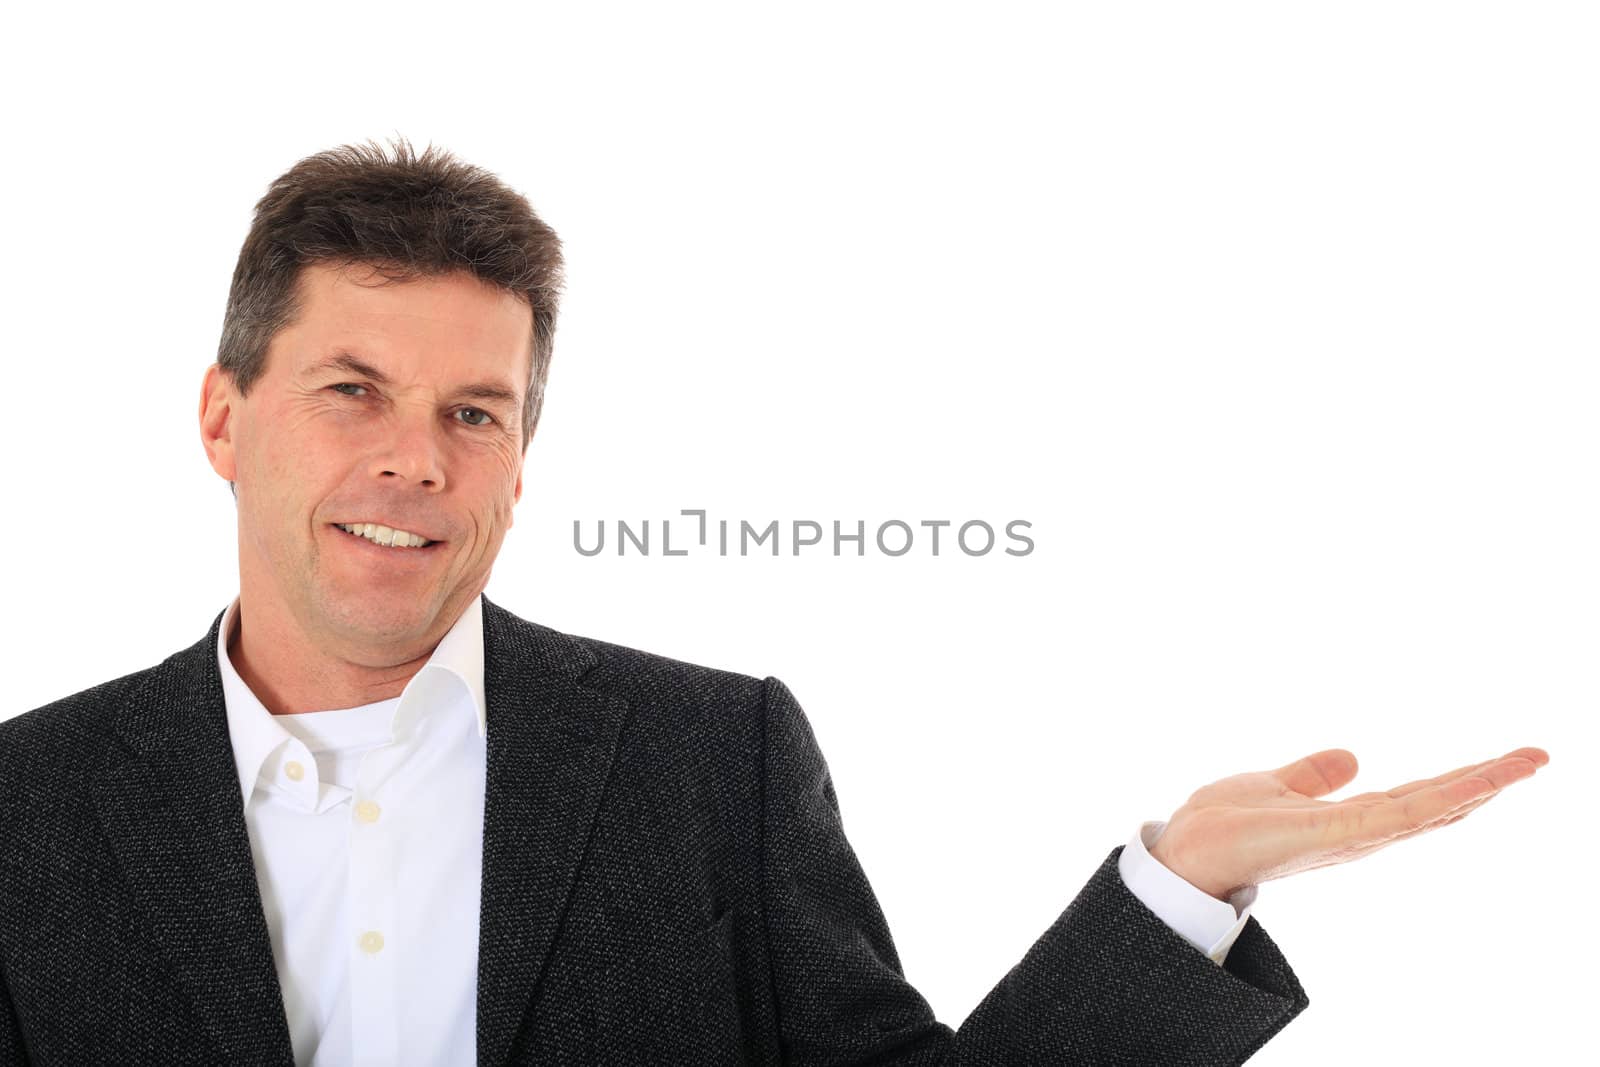 Attractive middle-aged man pointing to the side. All on white background.